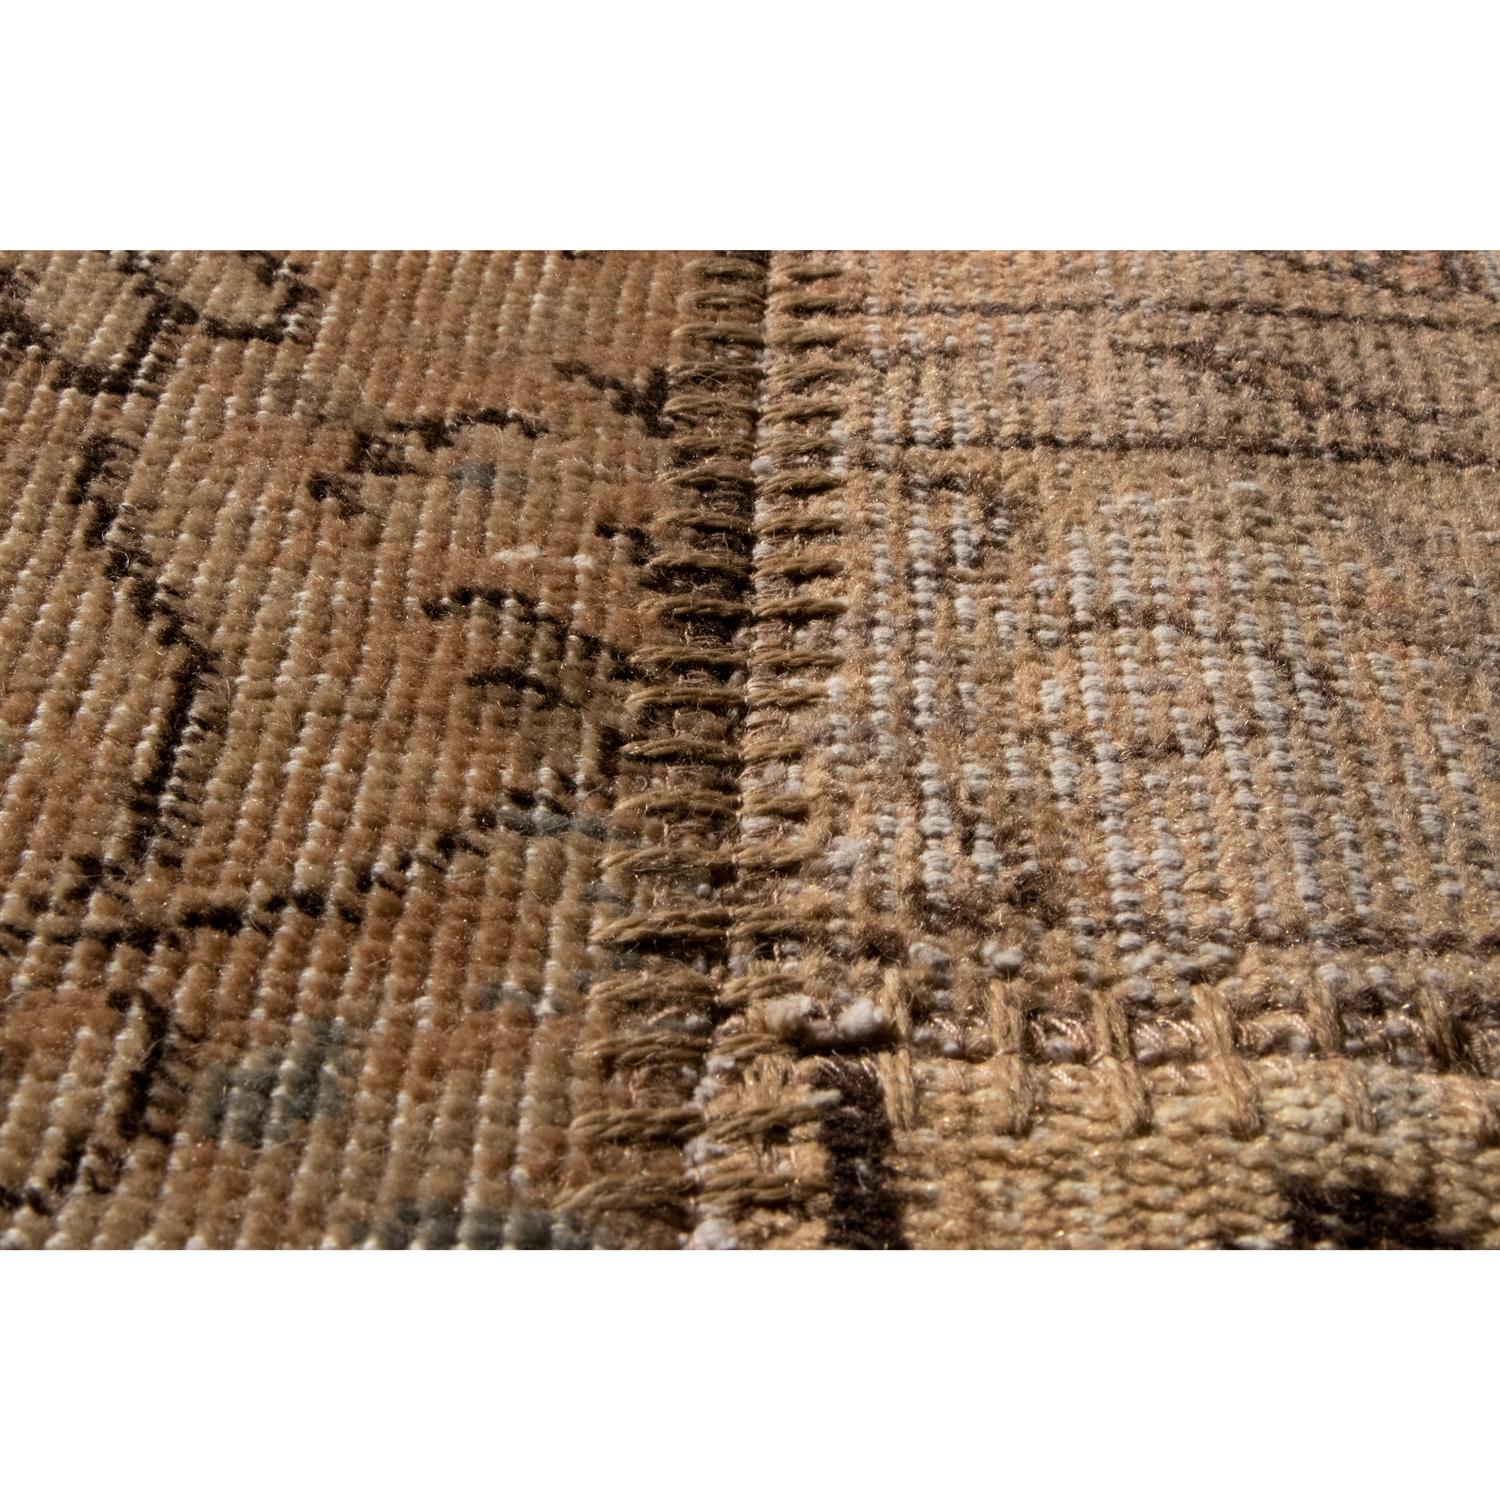 Hand-Knotted Nature Inspired Motifs Wool Cotton Rug by Deanna Comellini 120x120 cm For Sale